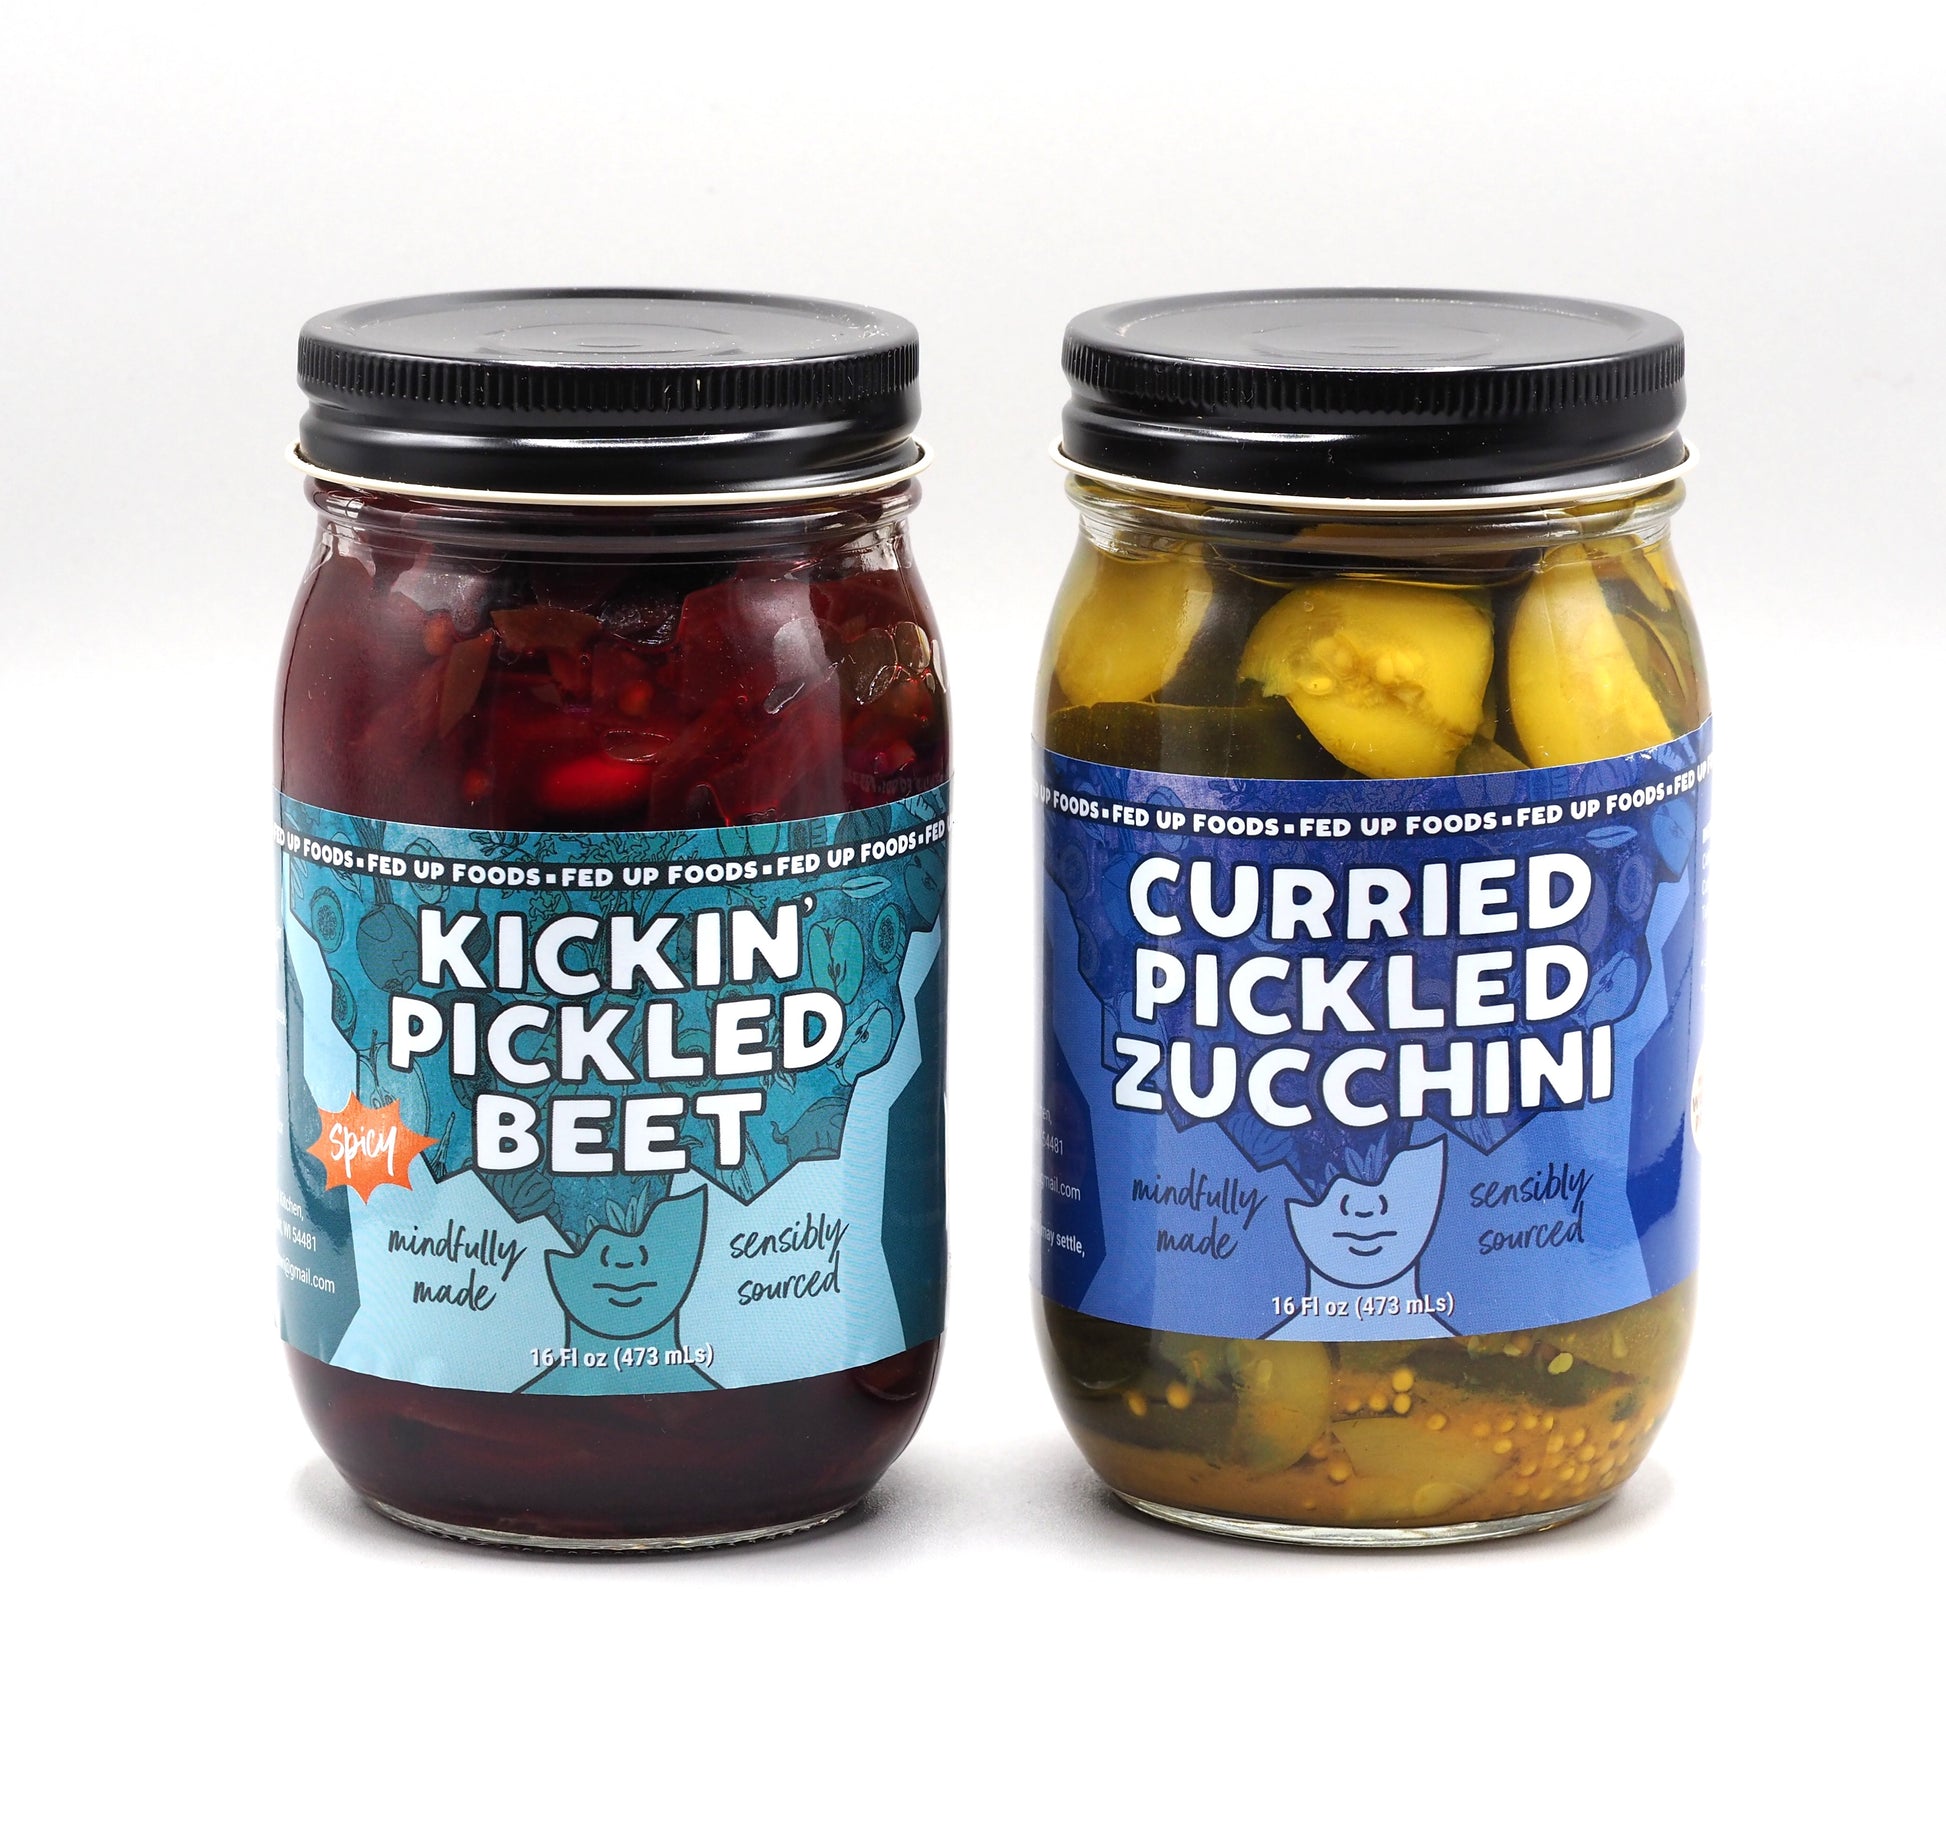 Fed Up Foods Kickin' Pickled Beet and Curried Pickled Zucchini in a 2 pack build your own variety pack